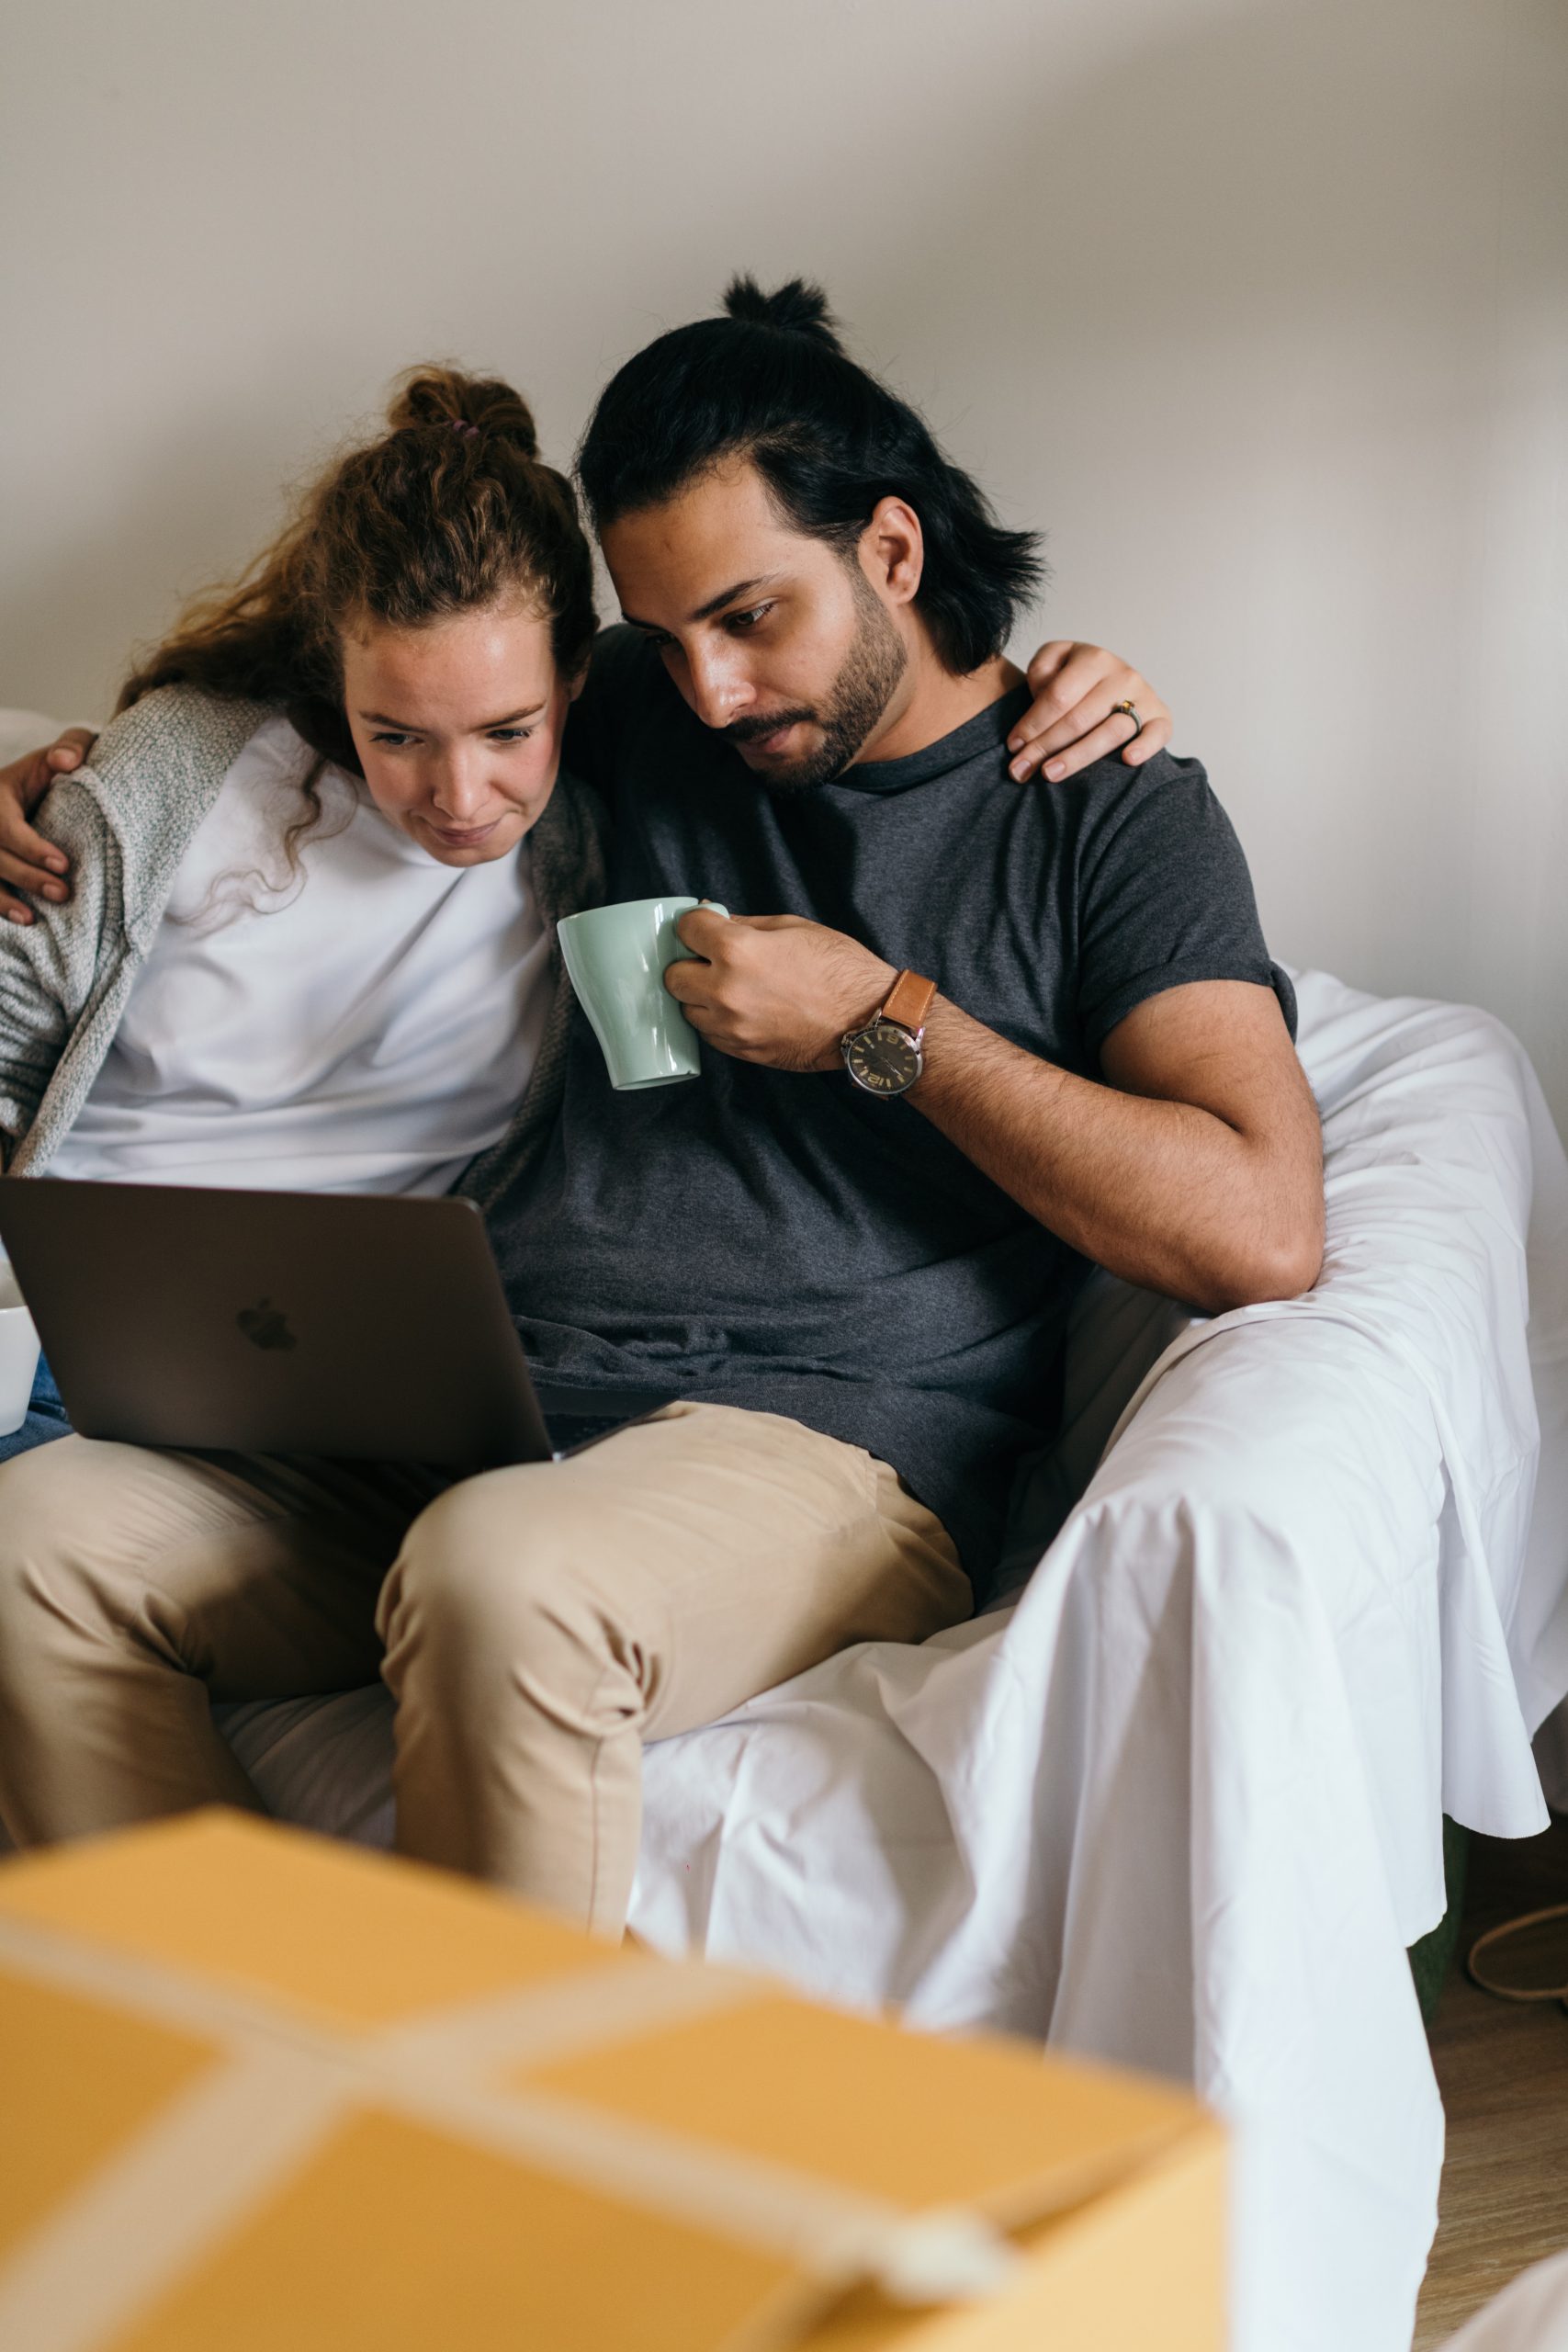 Couple sitting on couch looking at laptop screen.